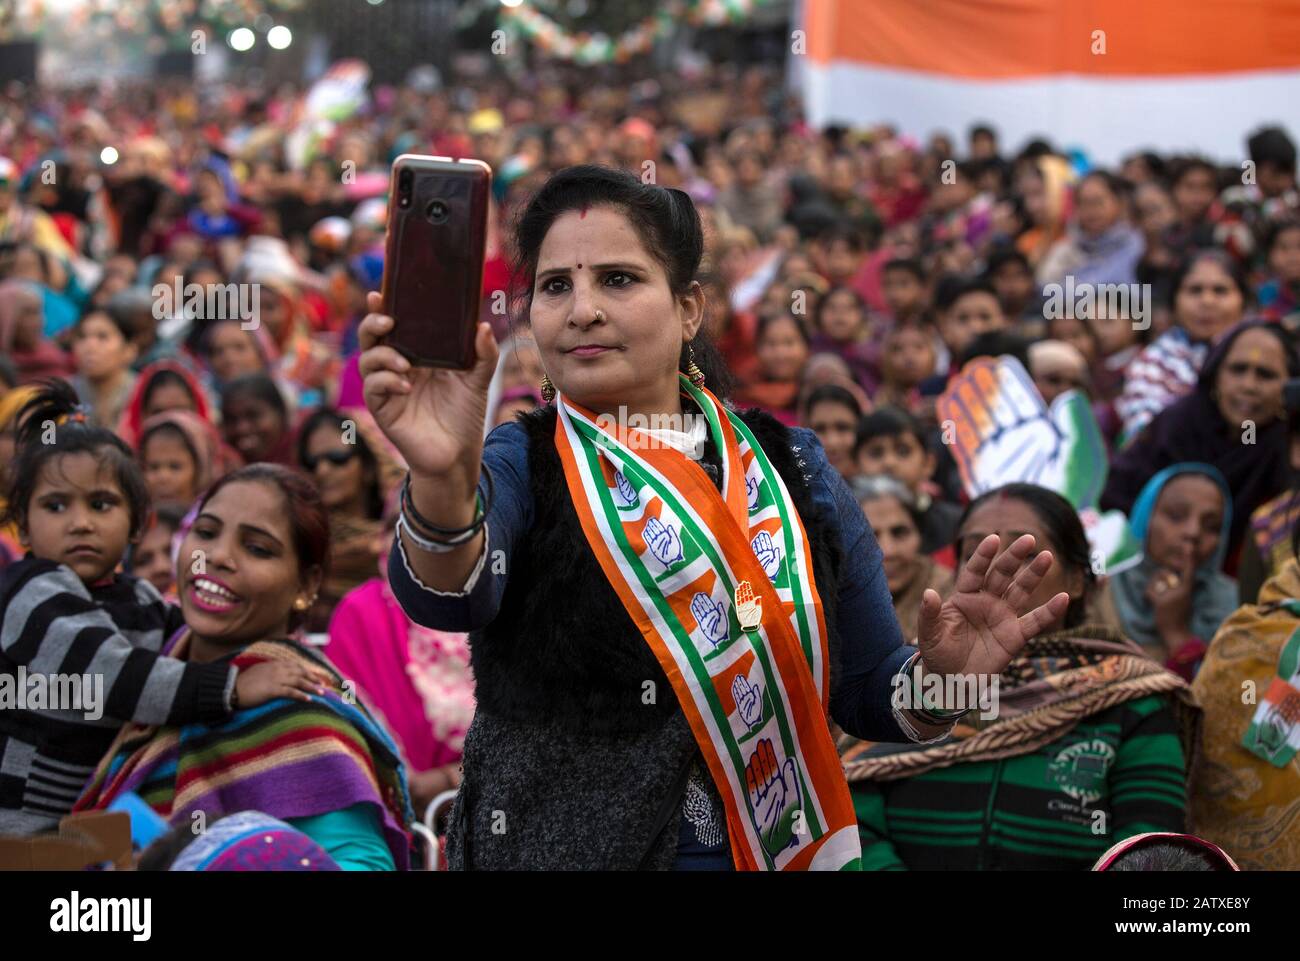 New Delhi, India. 5th Feb, 2020. A supporter of Indian National Congress (INC) takes photos during an election campaign in New Delhi, India, Feb. 5, 2020. Campaigning for upcoming local elections here in the Indian capital reached a crescendo on Wednesday as different political parties are trying hard to woo voters to their side. Credit: Javed Dar/Xinhua/Alamy Live News Stock Photo